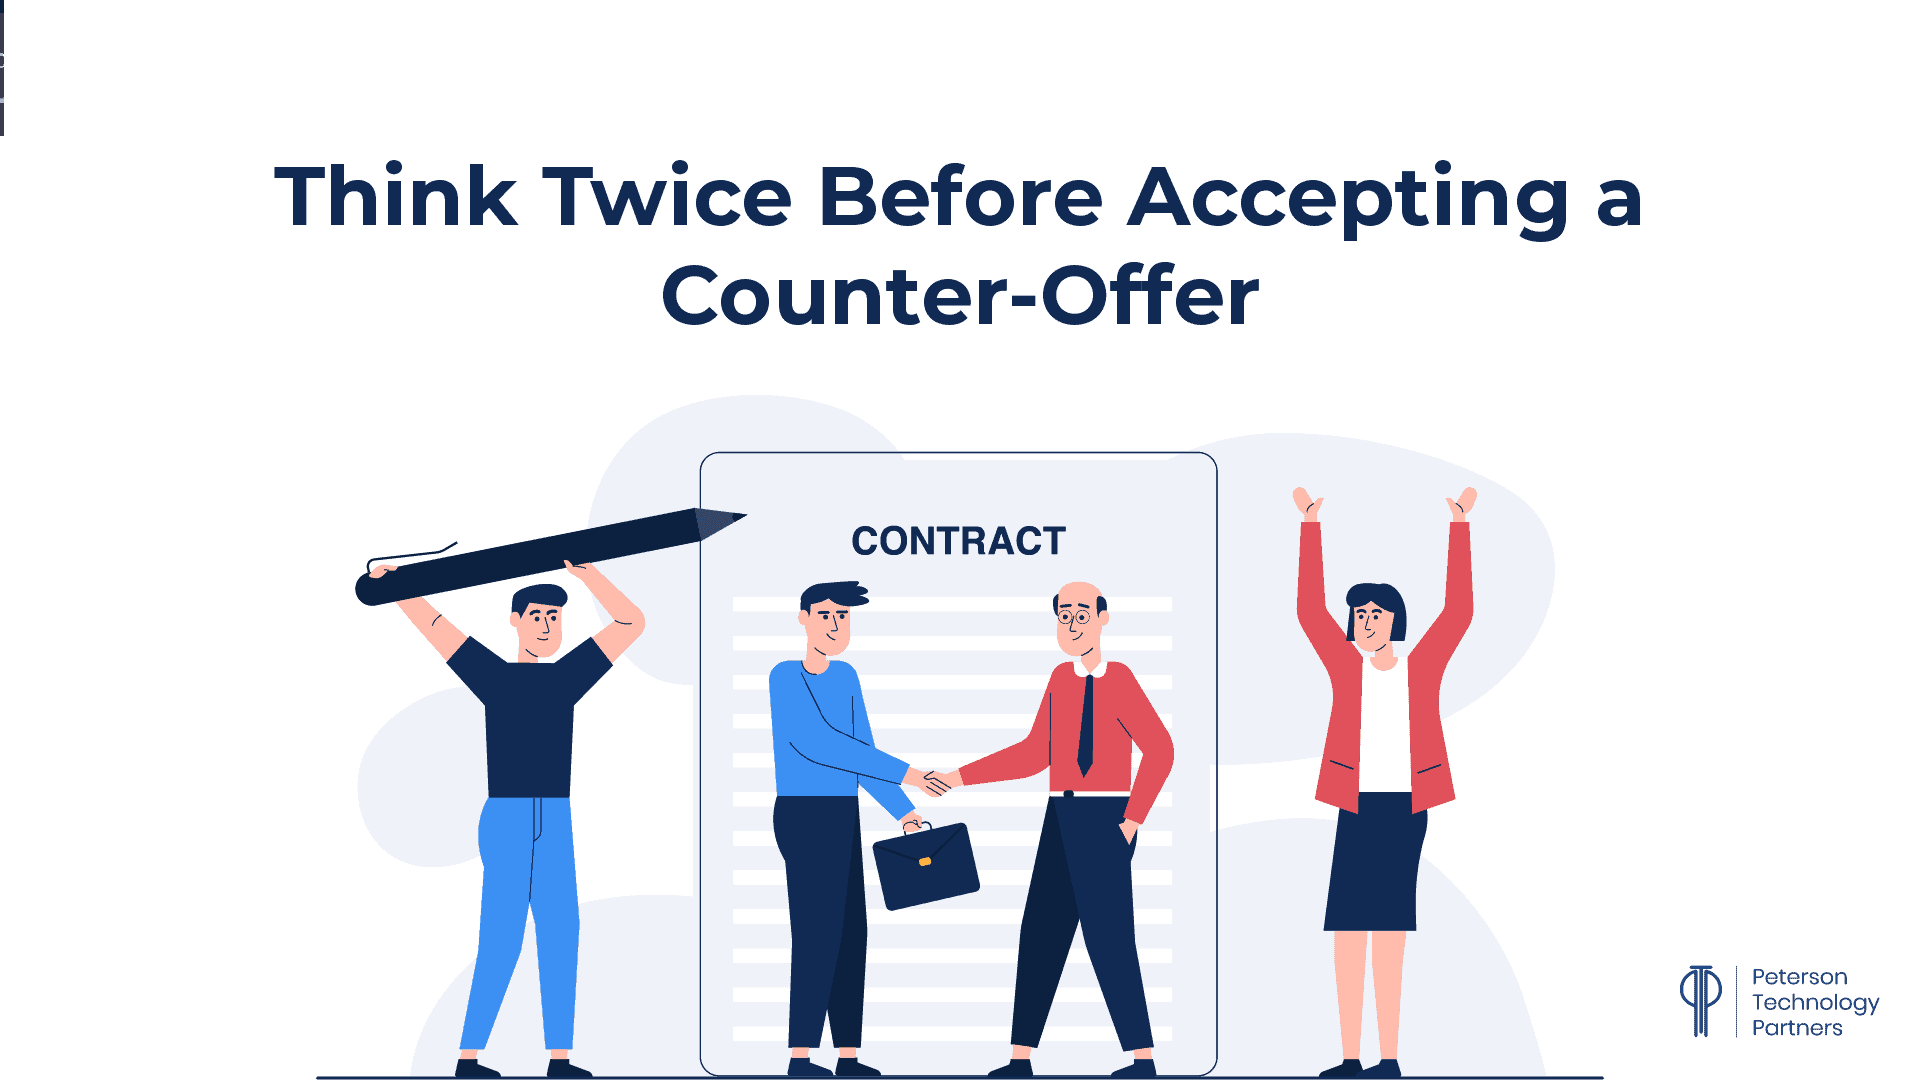 Be Cautious Before Accepting a Counter-Offer